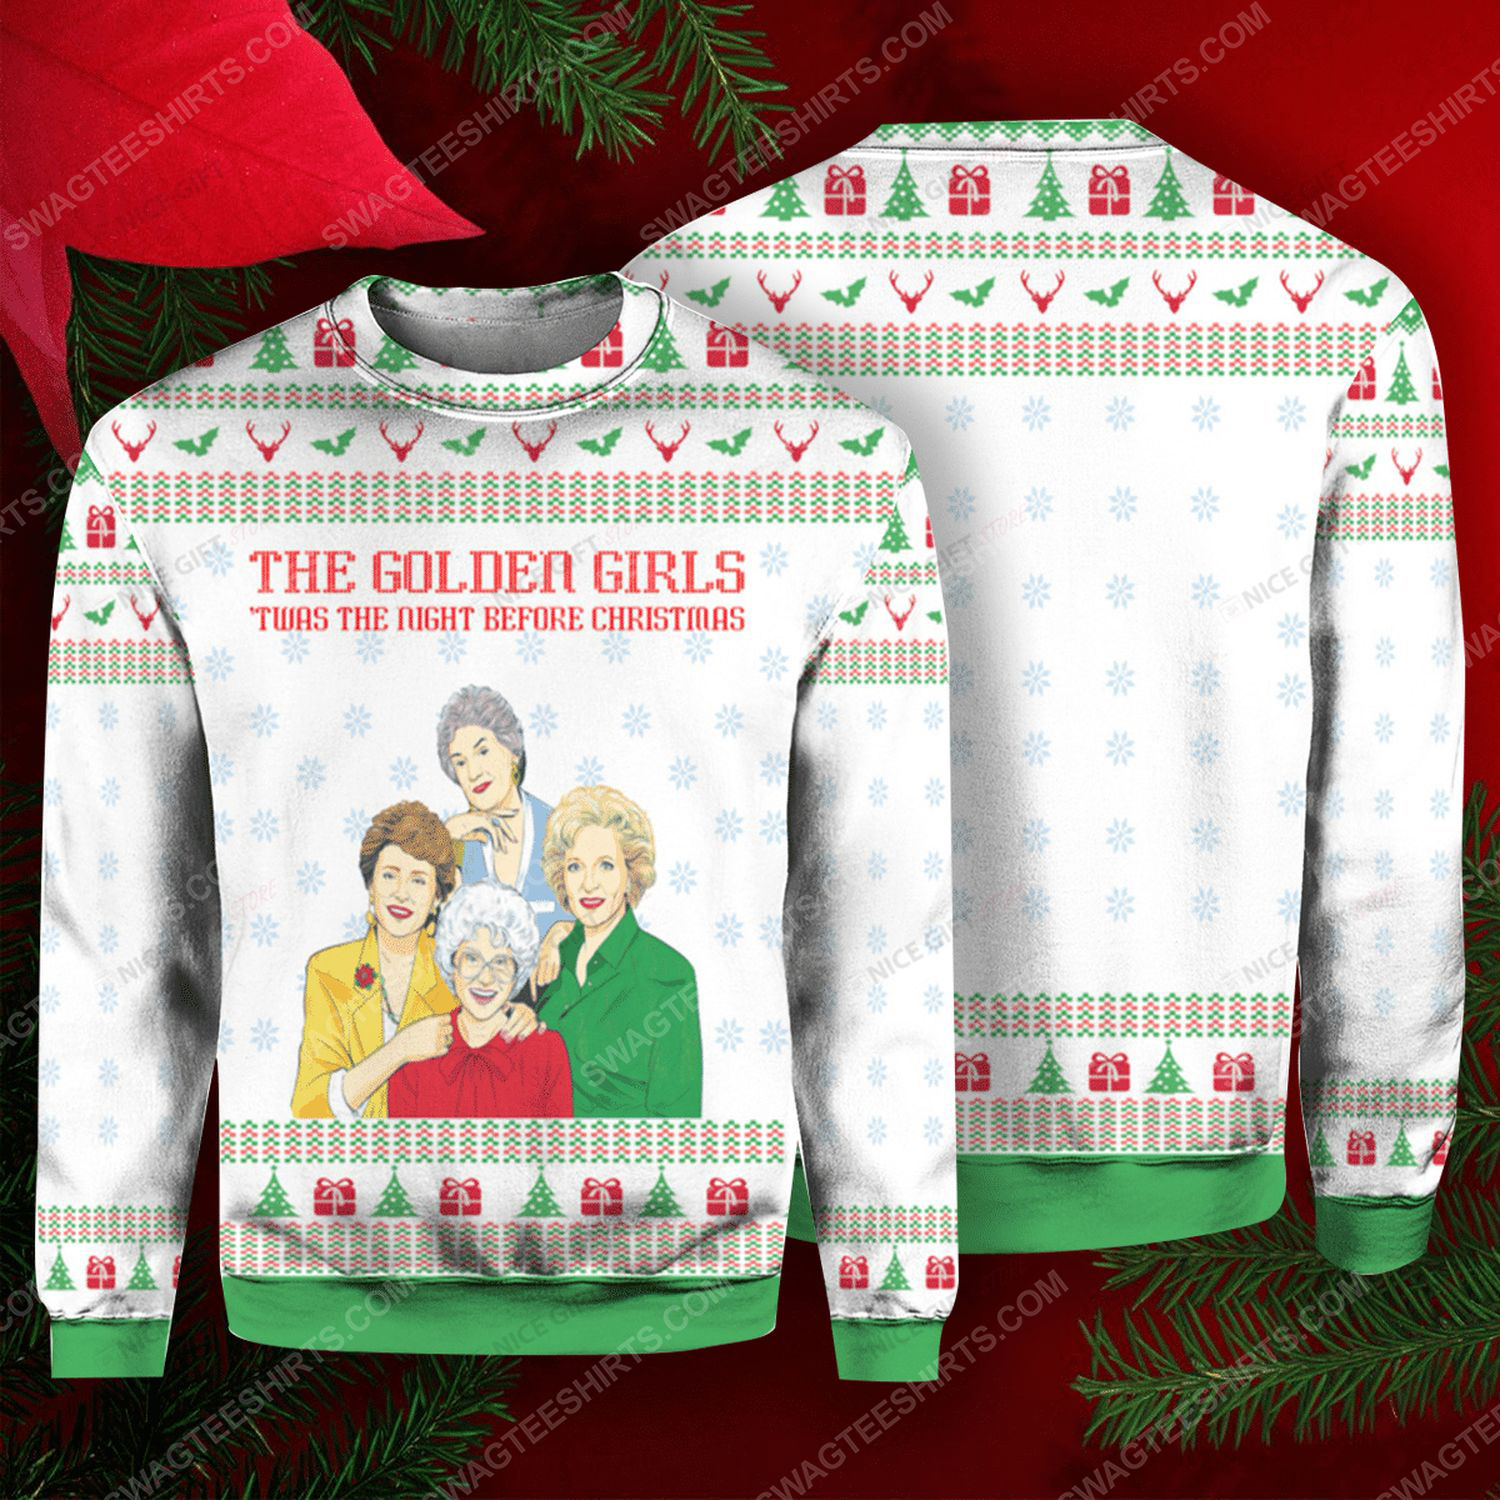 The golden girls 'twas the nightmare before christmas ugly christmas sweater 1 - Copy (2)